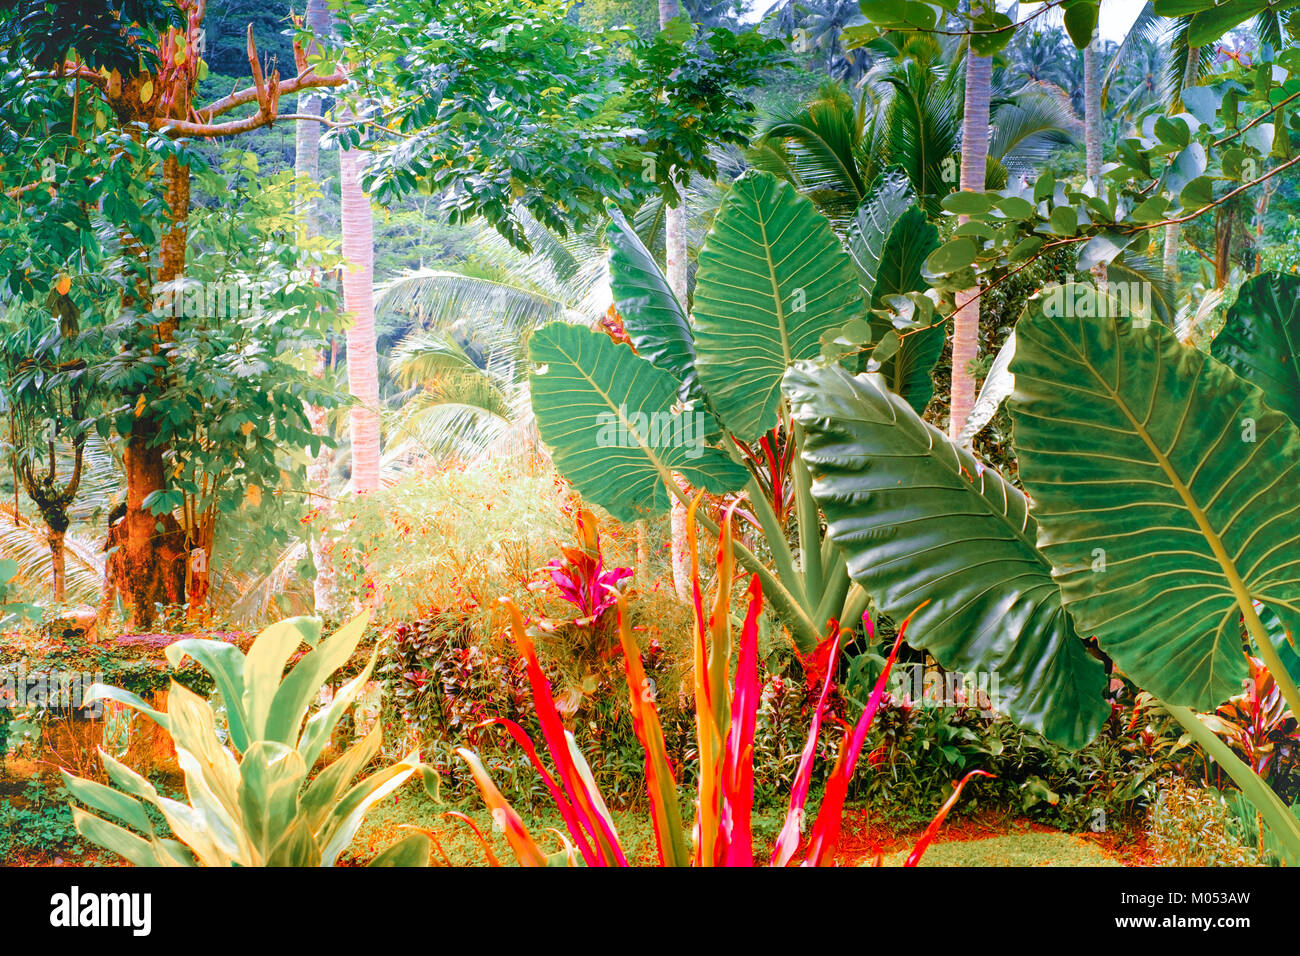 Surreal colors of fantasy tropical garden with amazing plants and flowers Stock Photo